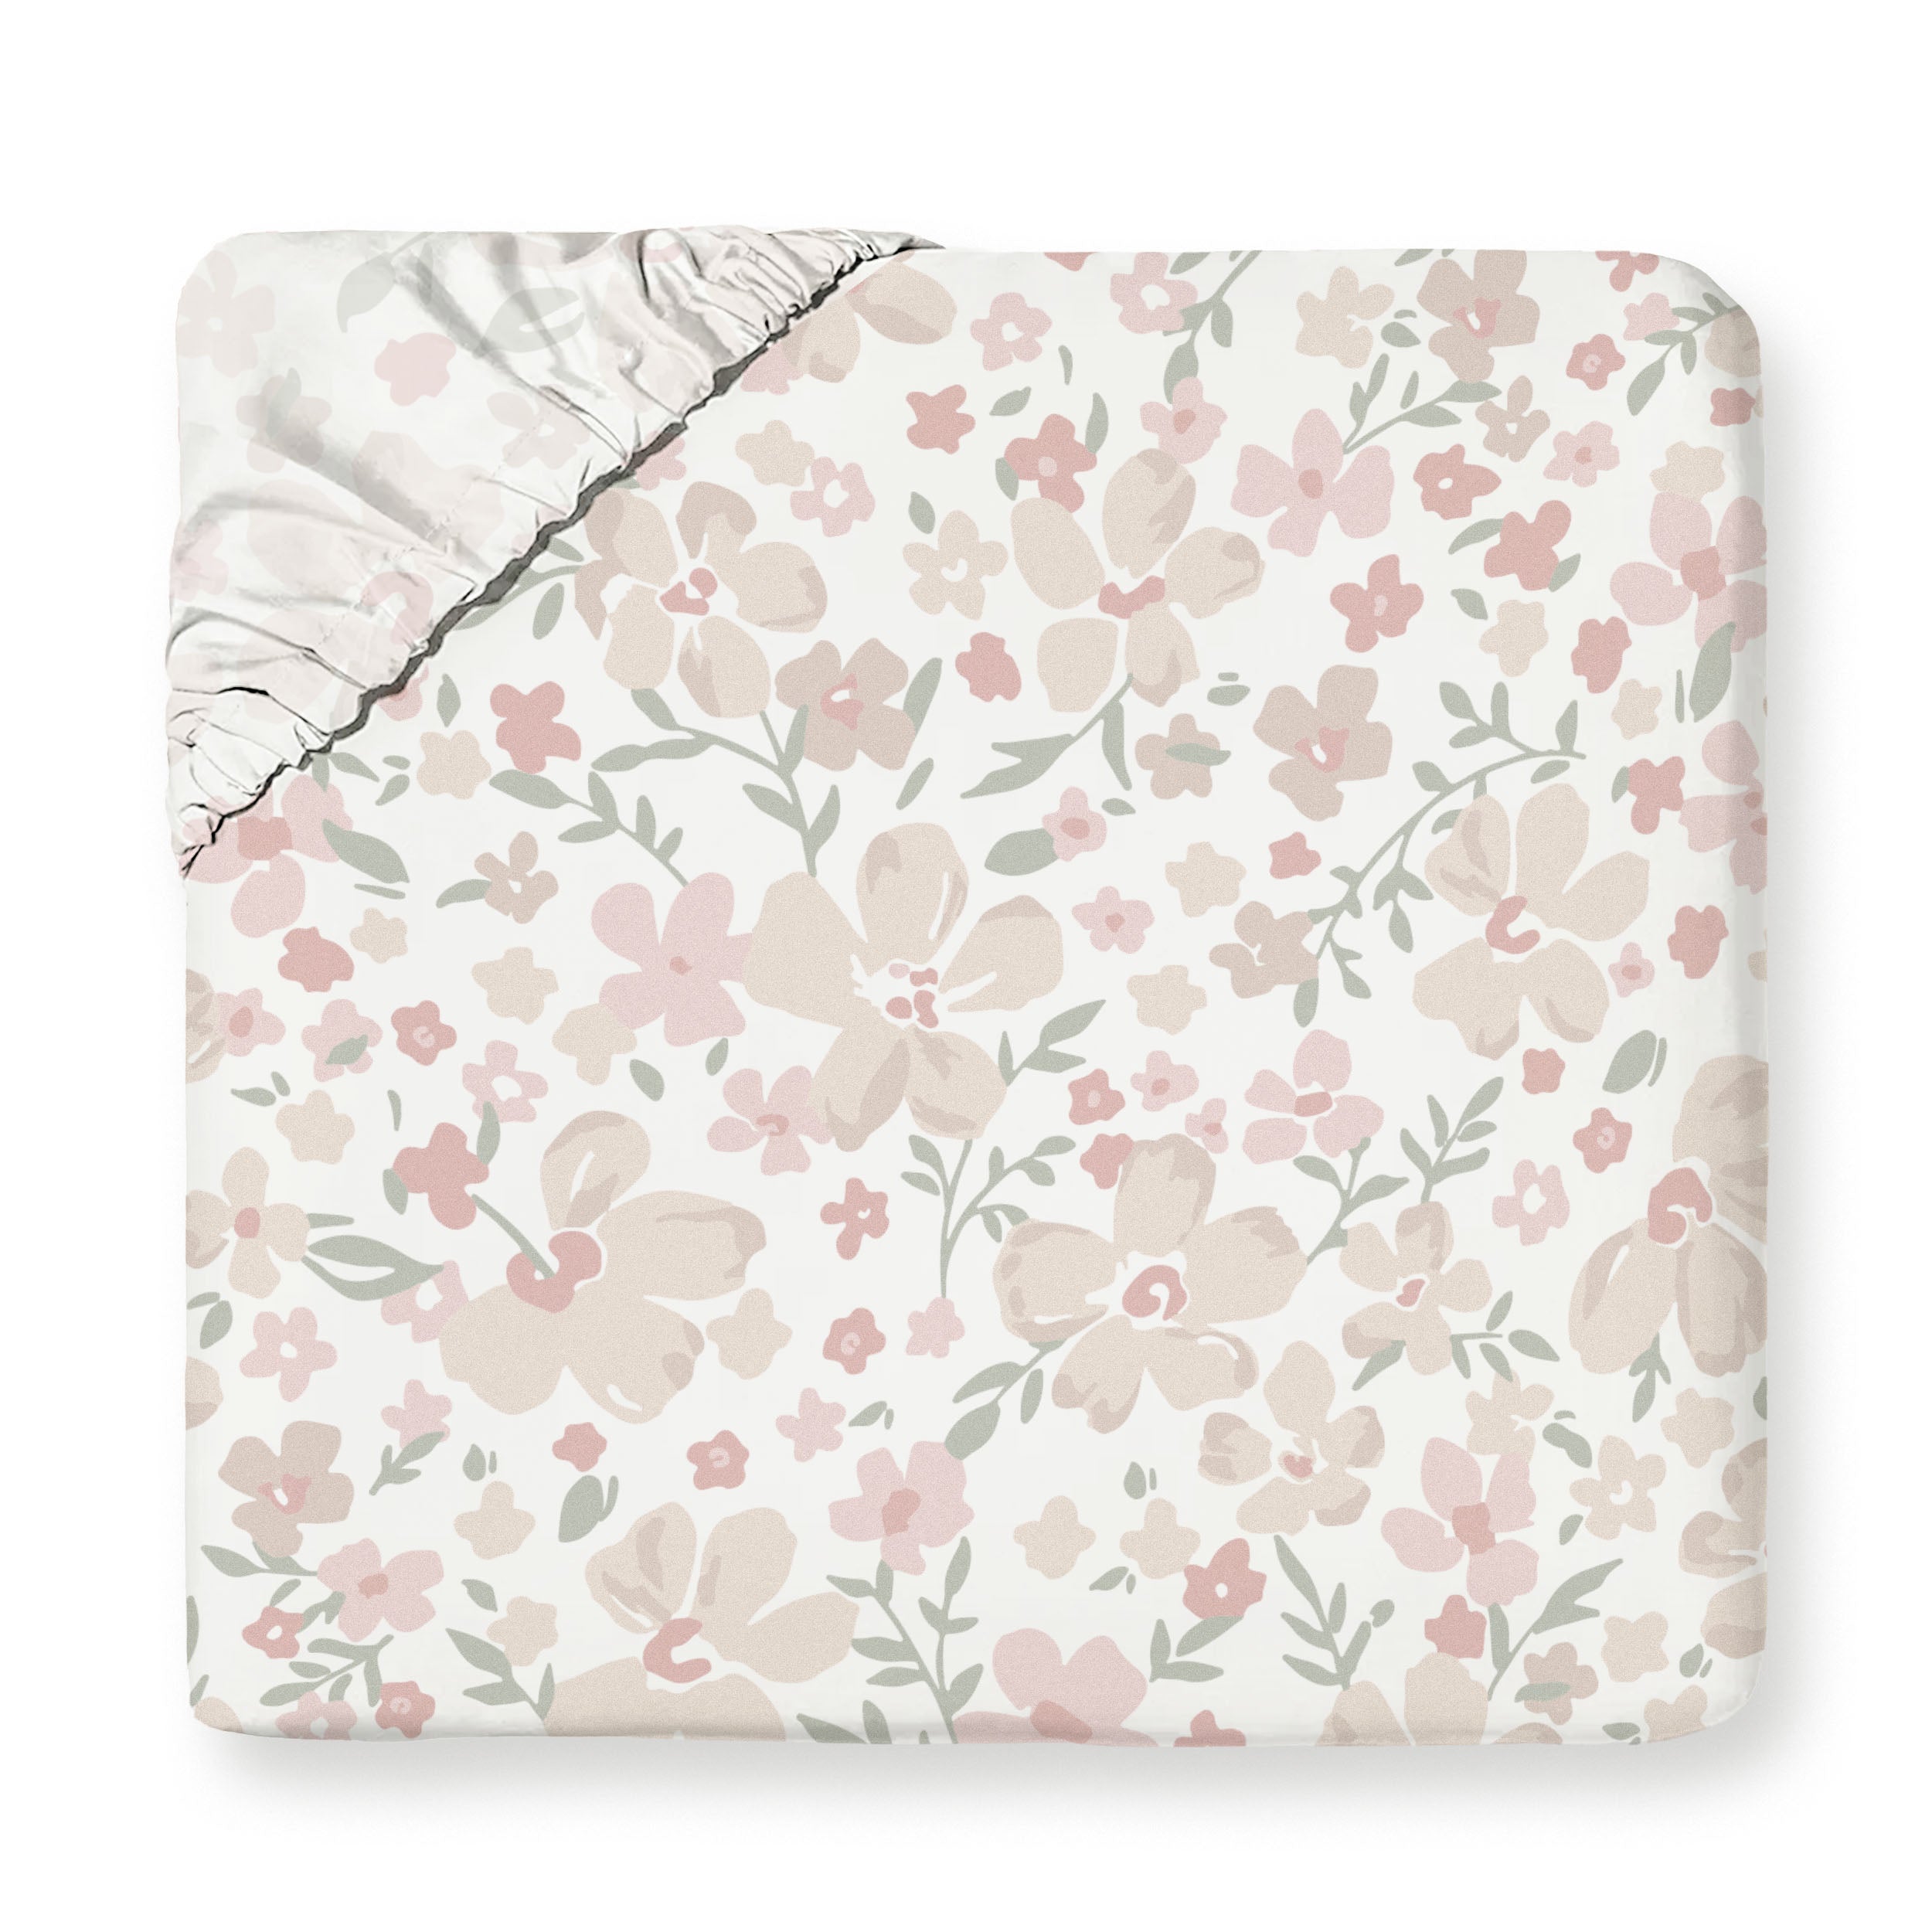 A soft, square comforter with a delicate floral pattern in shades of pink and green, slightly wrinkled on the top left corner, displaying a cozy and inviting appearance. This is the Organic Cotton Fitted Sheet Set - Blossom from Makemake Organics.